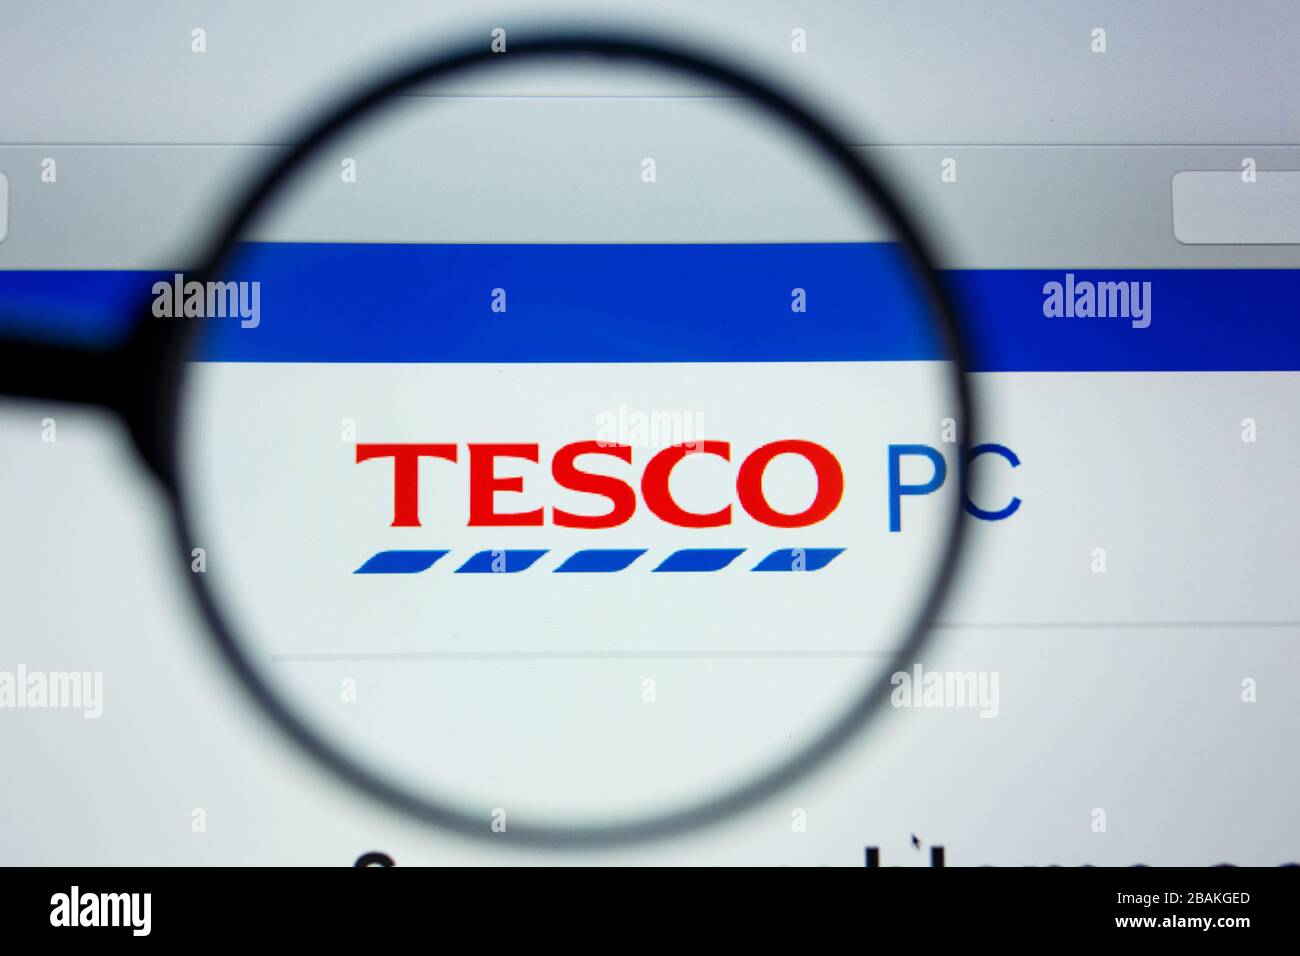 Los Angeles, California, USA - 12 June 2019: Illustrative Editorial of Tesco PC website homepage. Tesco PClogo visible on display screen Stock Photo